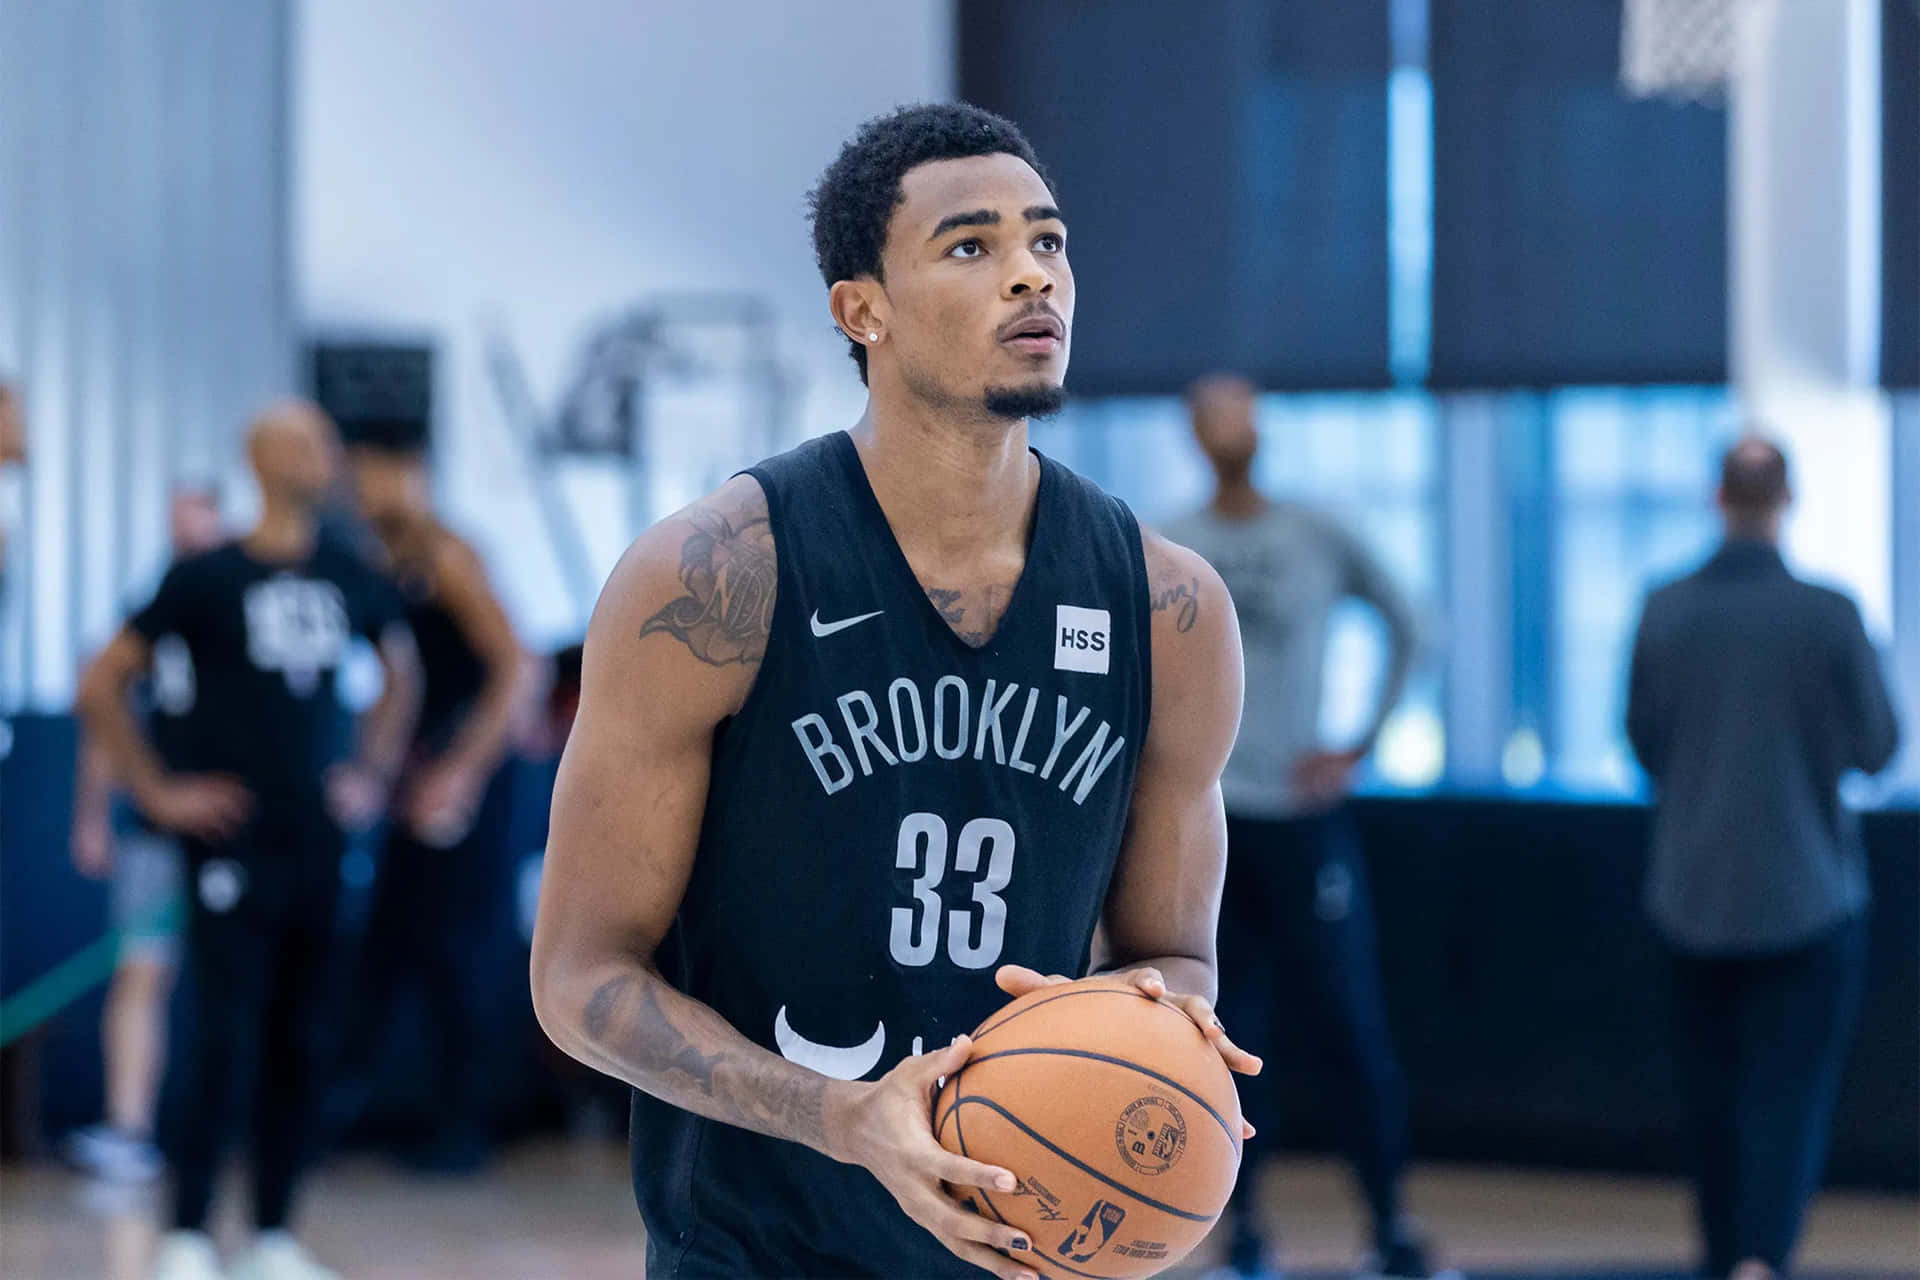 Brooklyn Nets Player33 Practice Session Wallpaper